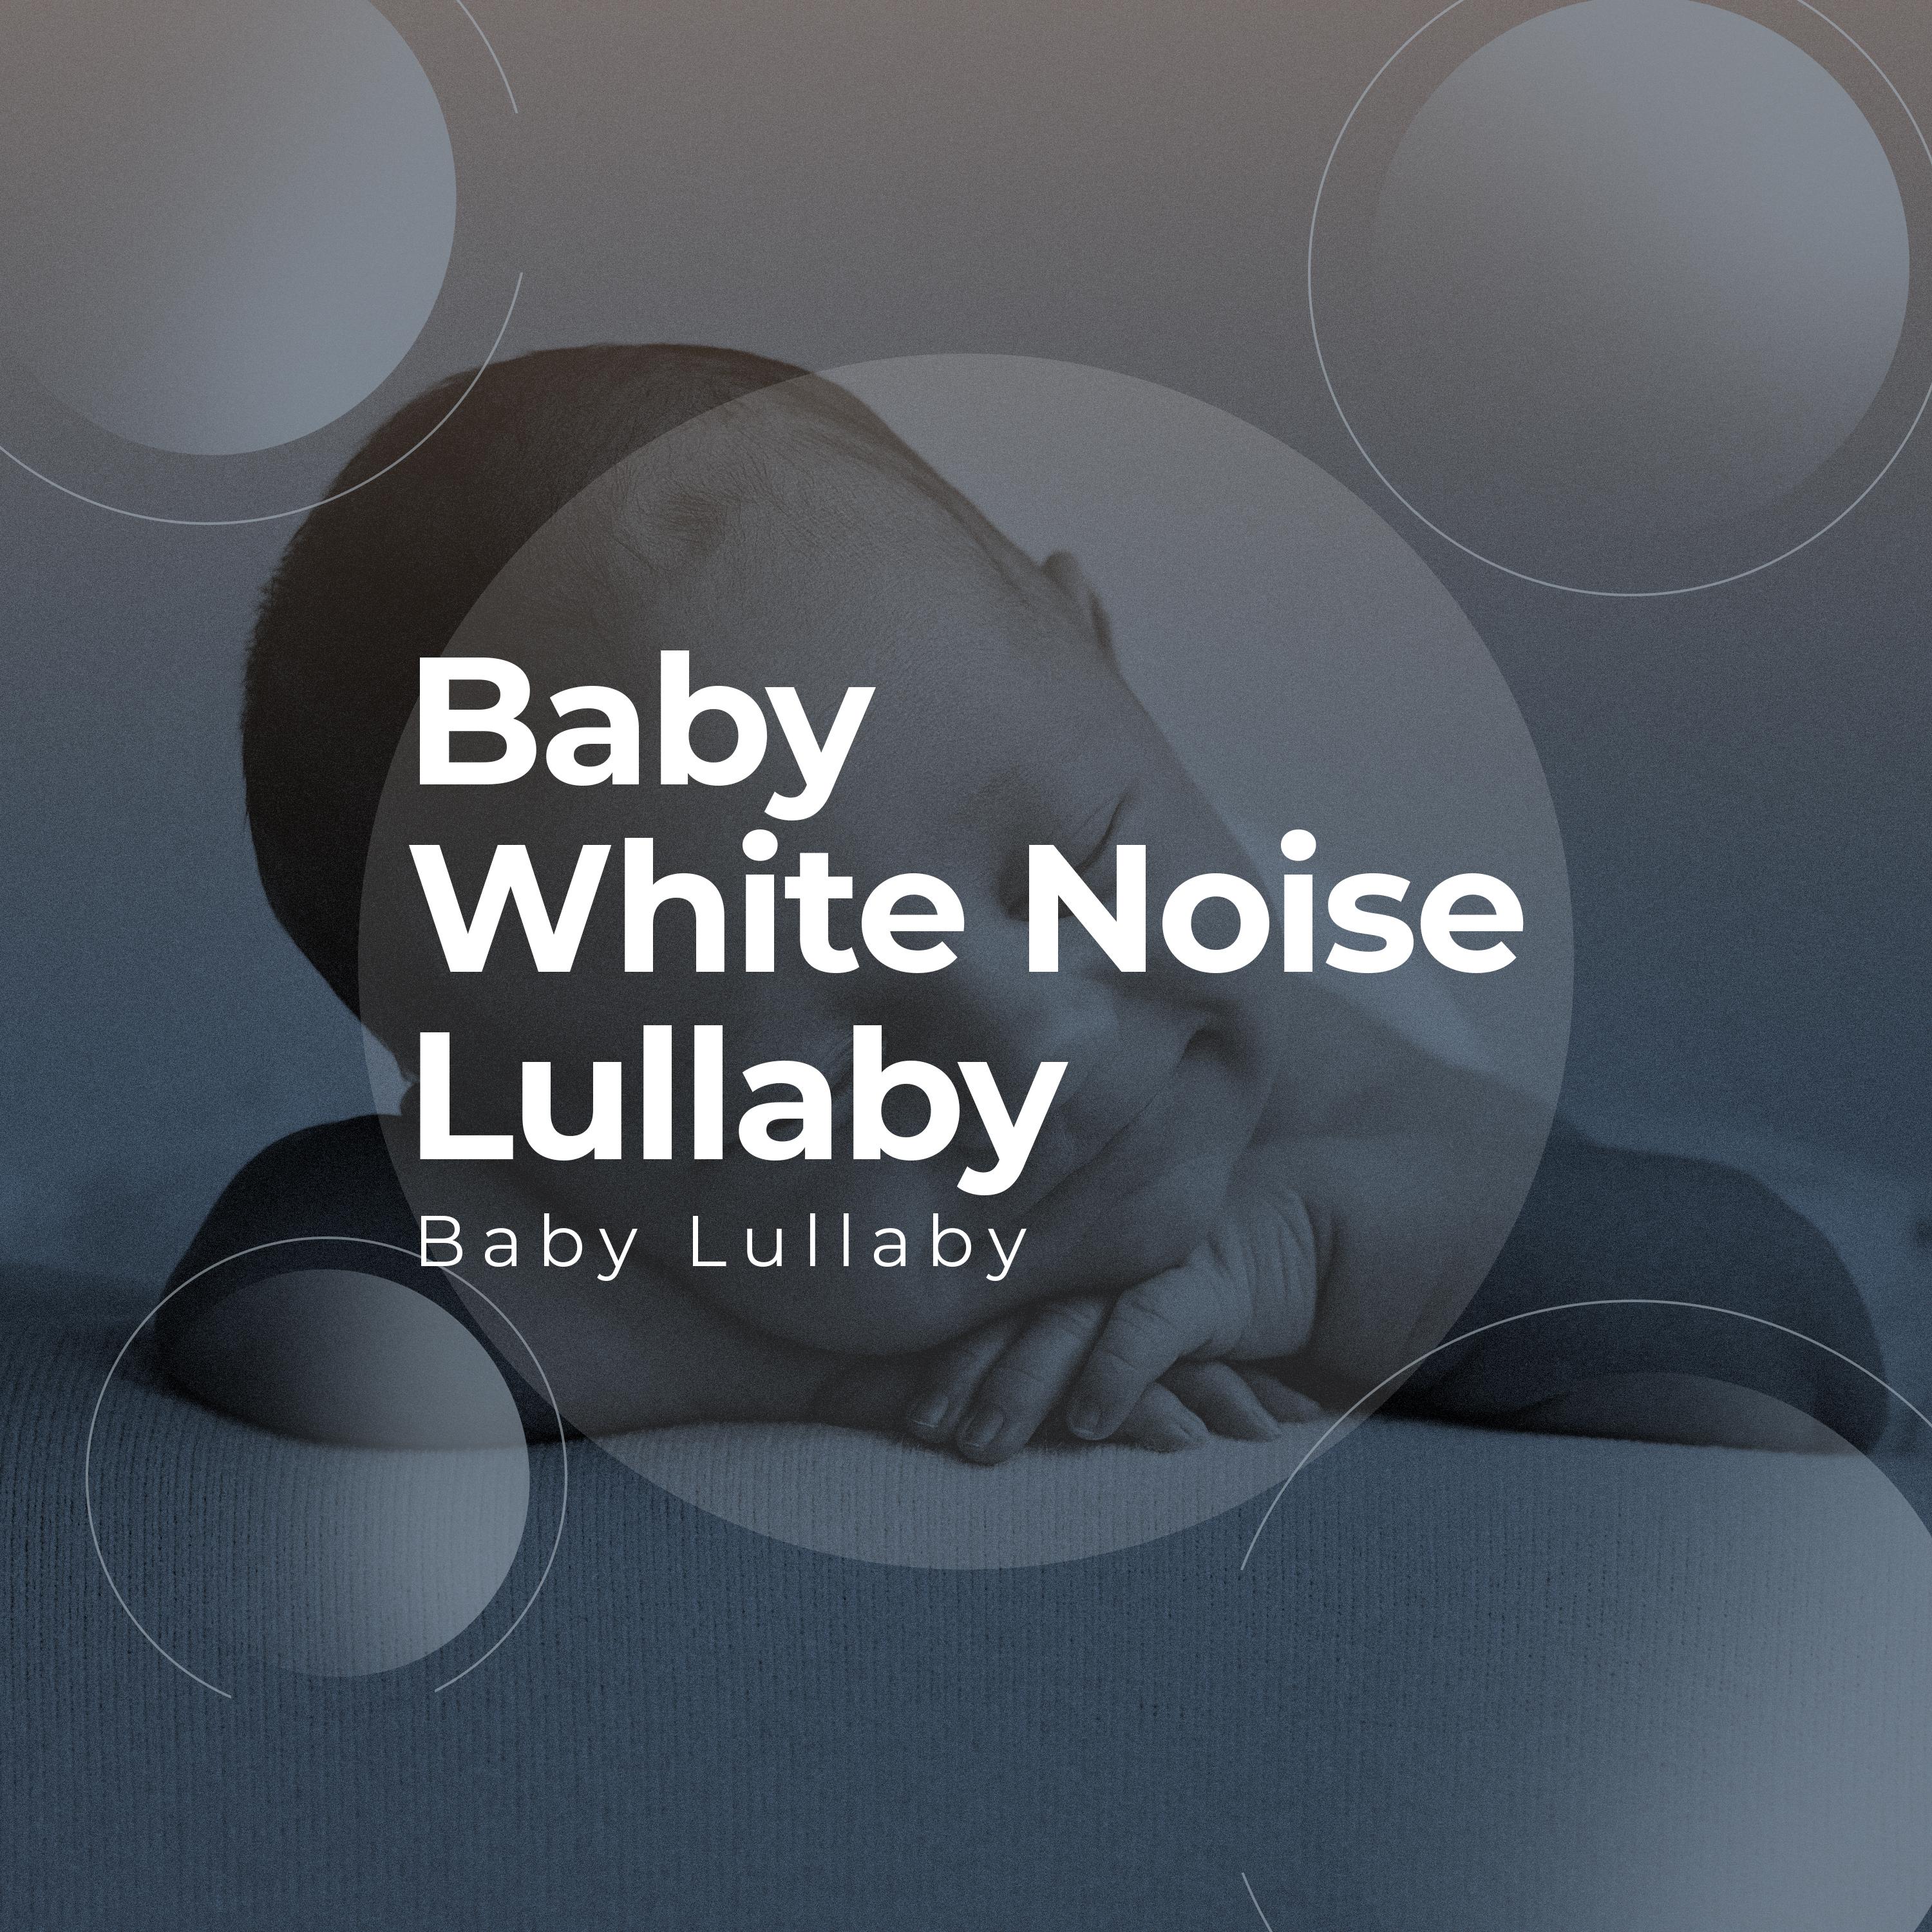 Baby White Noise: Lullaby